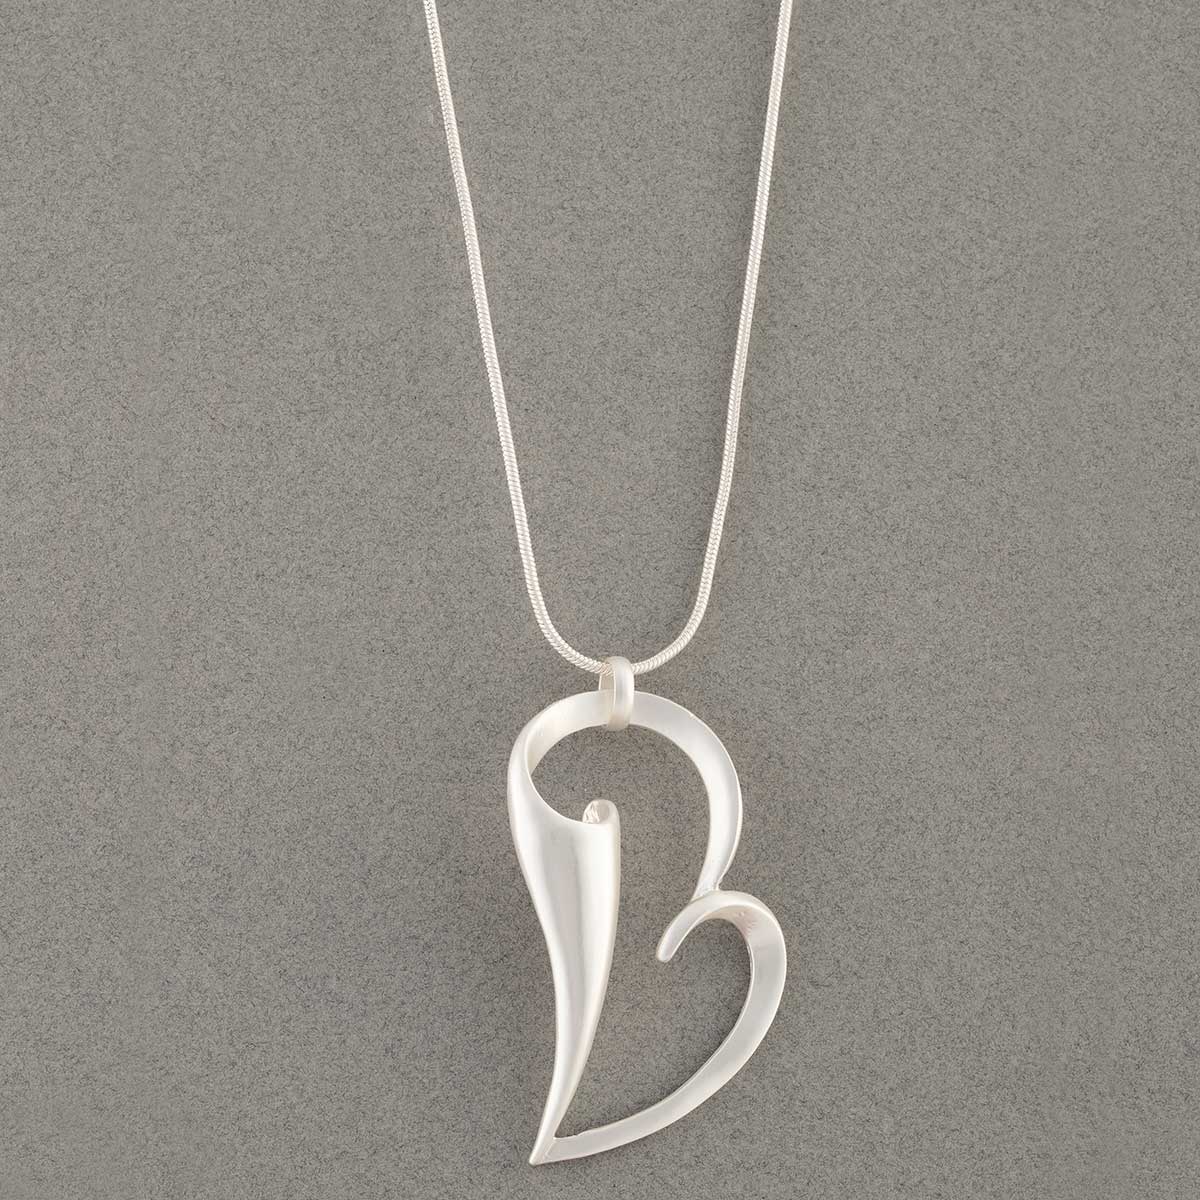 Satin Silver 1.25"X2.5" Heart Necklace on Chain 16"-19"